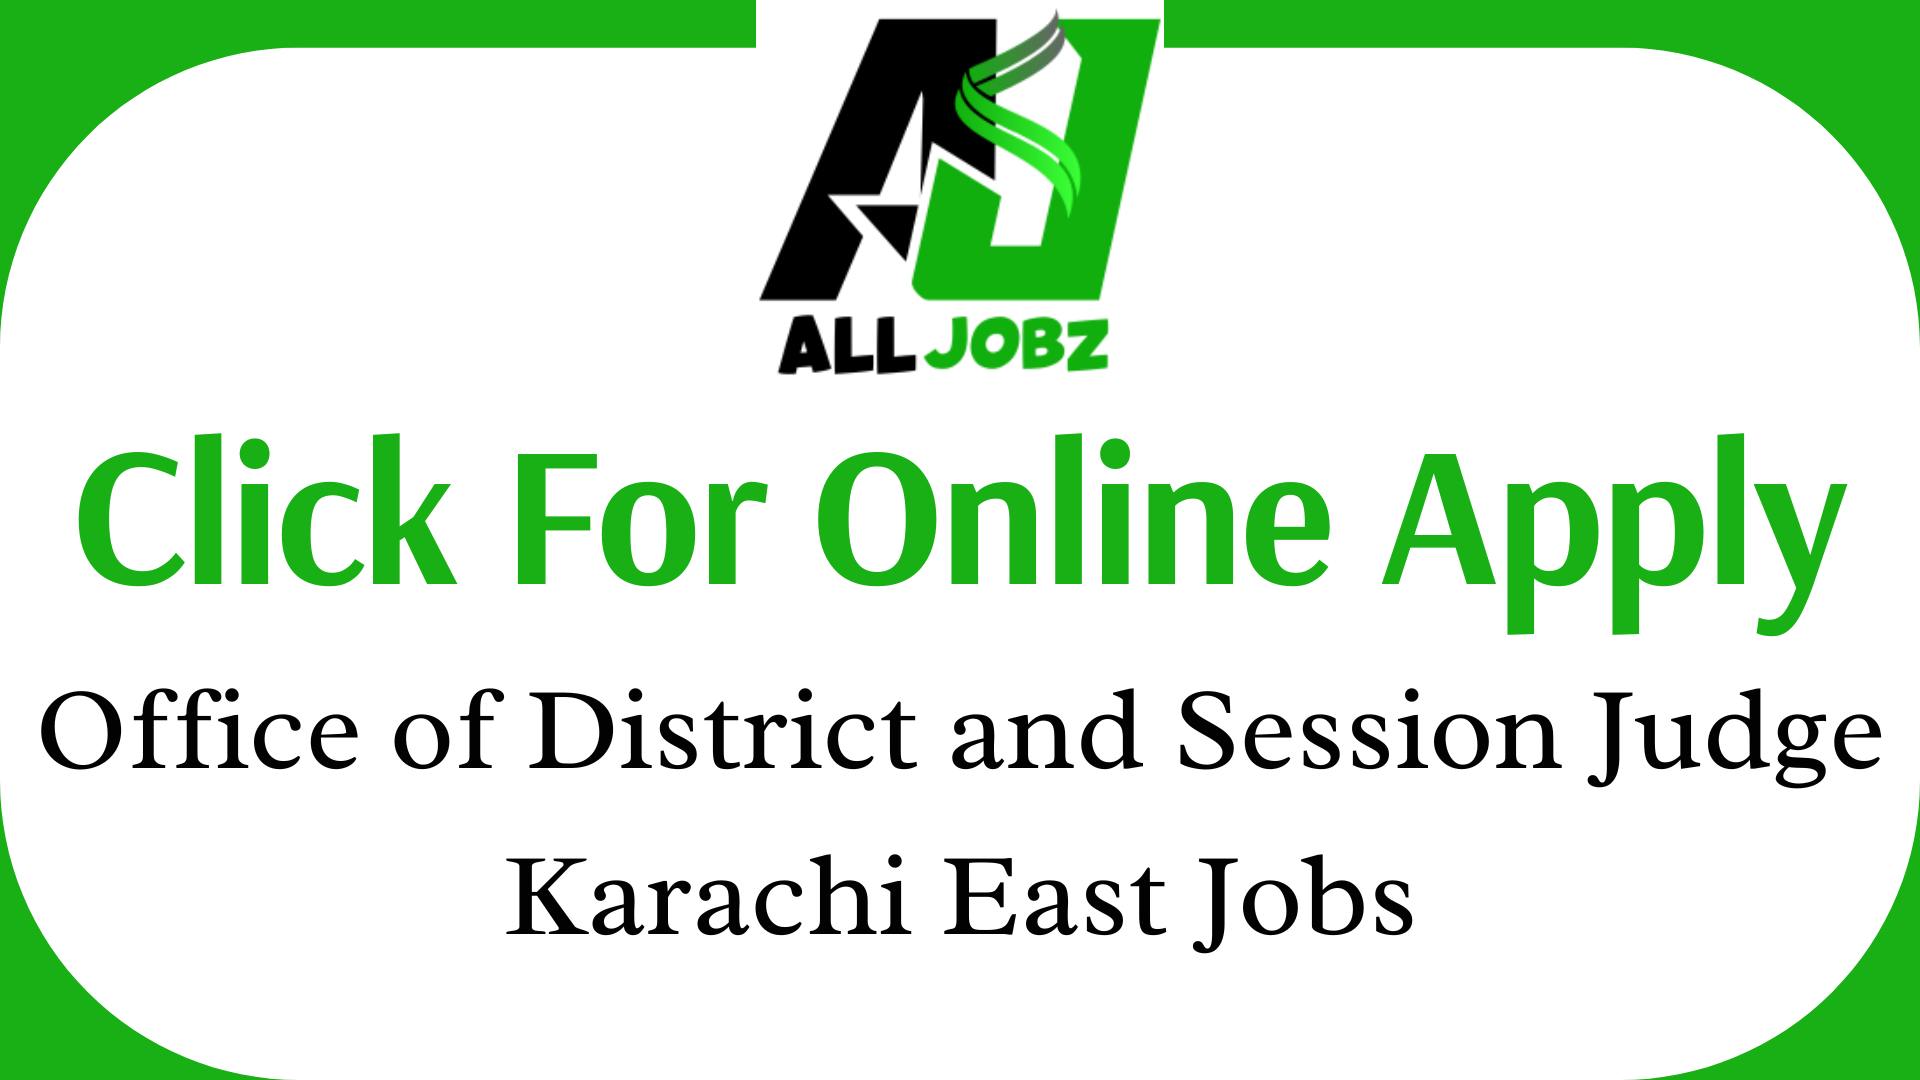 Job Opportunities At Office Of District And Session Judge Karachi East As Stenographer,Computer Operator, Junior Clerk,Driver,Naib Qasid,Mali (Gardener),Chowkidar (Watchman),Lift Operator, District And Session Court Jobs Application Form, District And Session Court Jobs 2024, District And Session Court Karachi East Jobs, District And Session Court Karachi Jobs 2024, Office Of District And Session Judge Karachi East Jobs Salary, Office Of District And Session Judge Karachi East Jobs Online, District And Session Court Jobs Application Form,